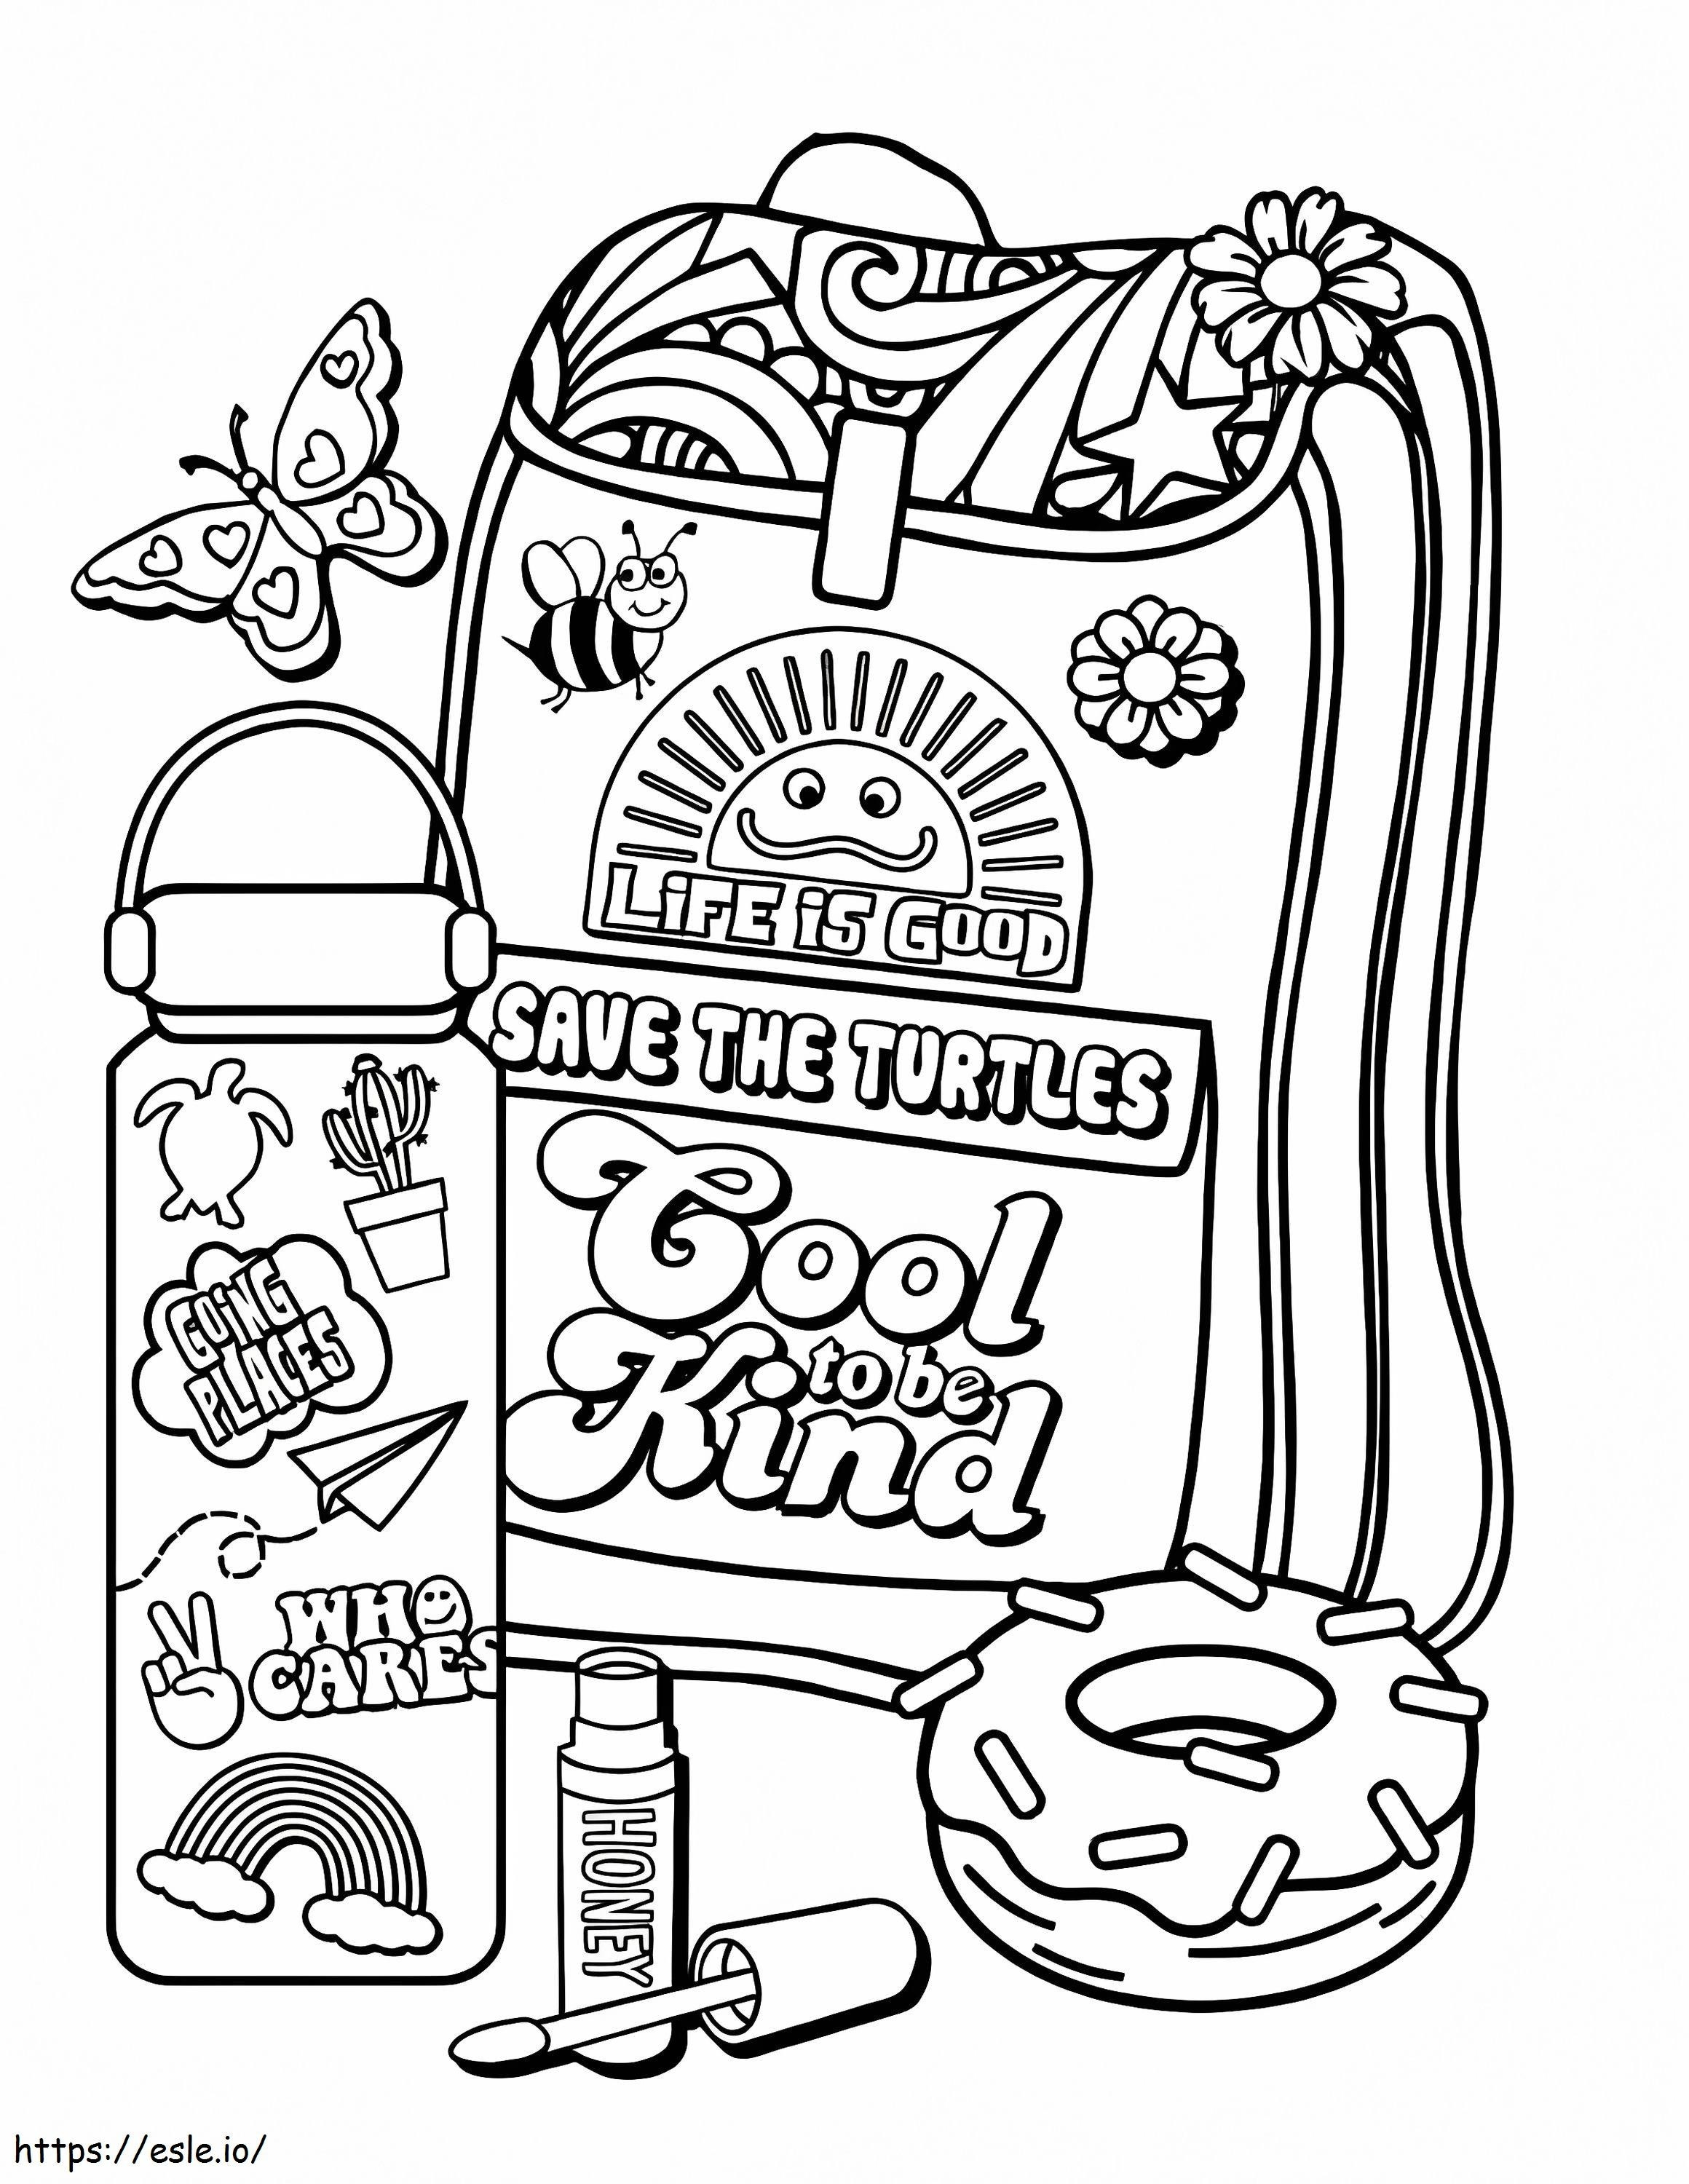 Cool To Be Kind VSCO Girl coloring page